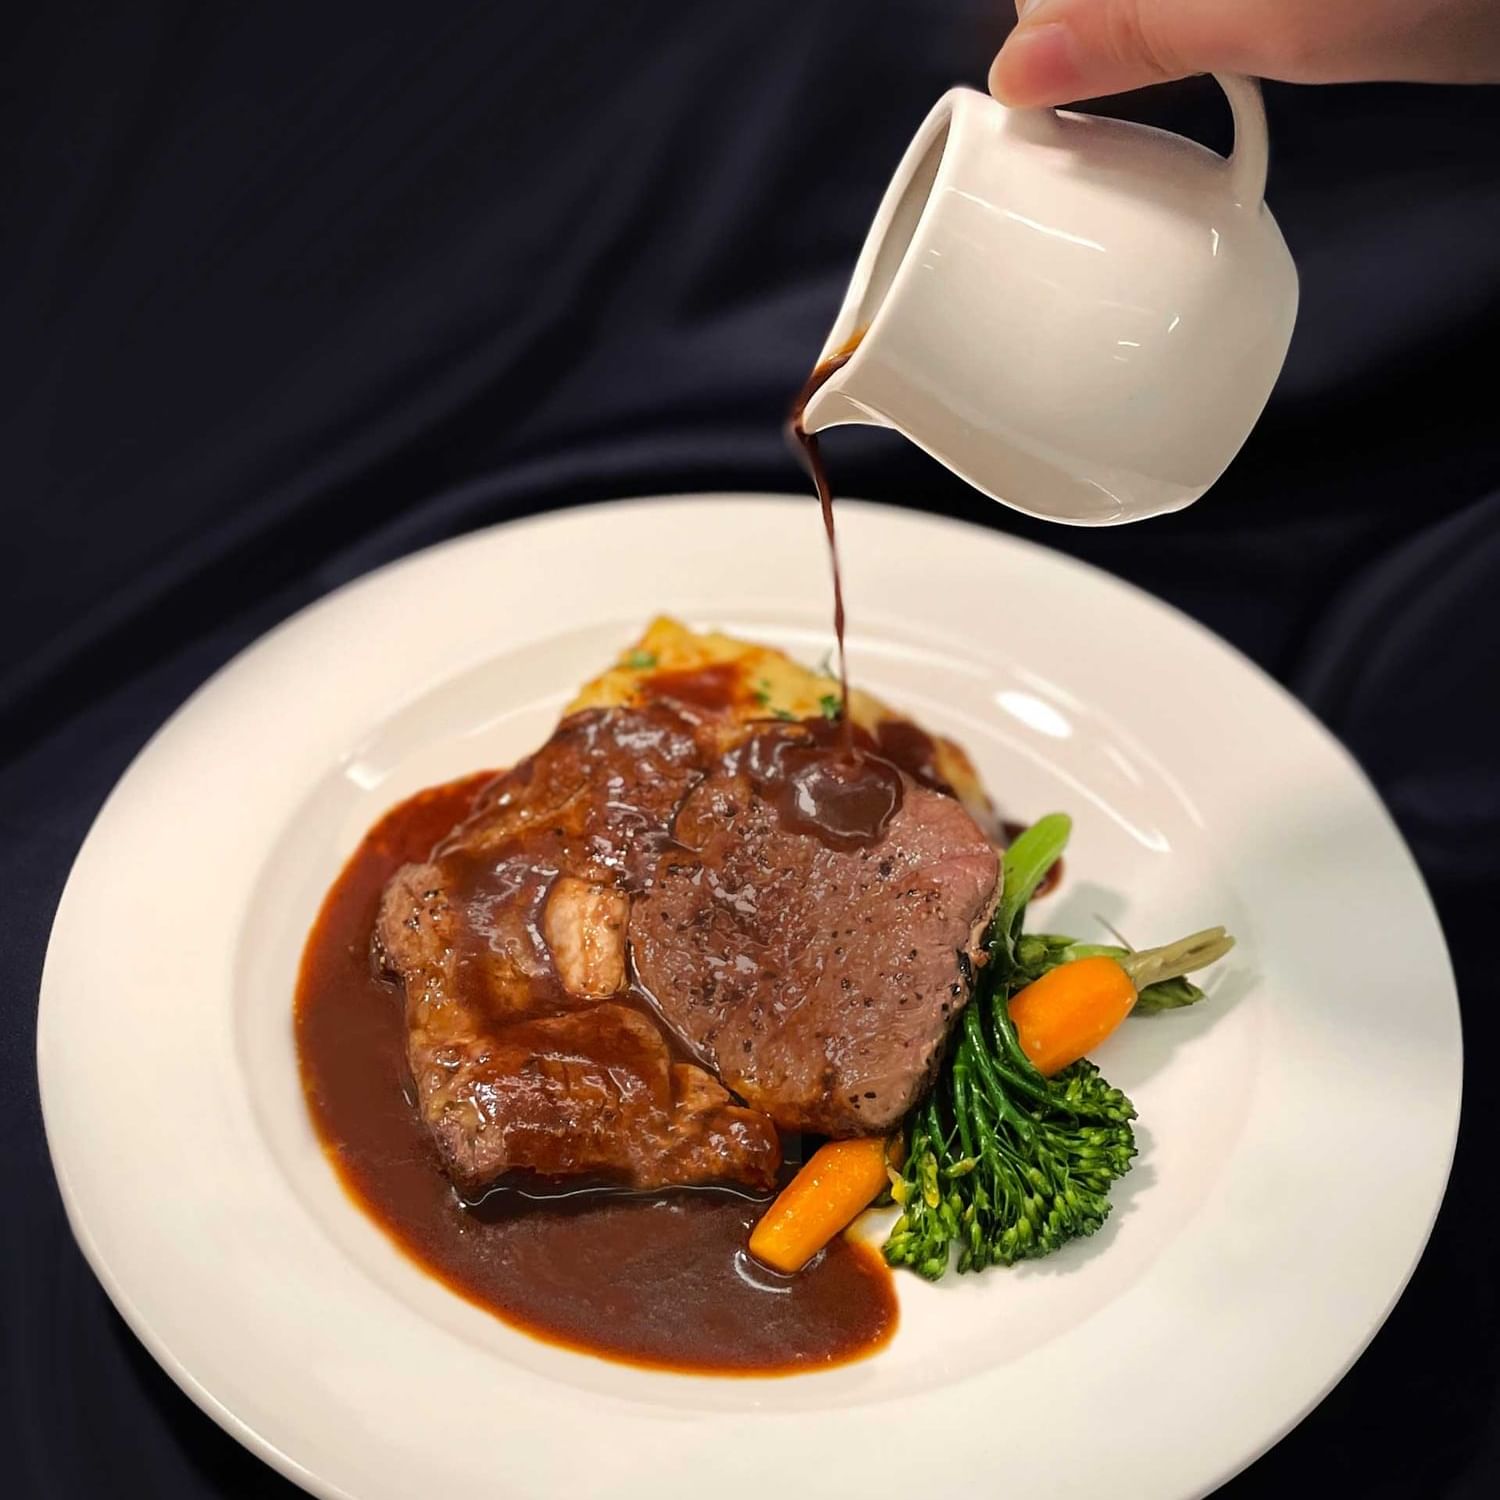 Variety of authentic dishes served at York Hotel Singapore